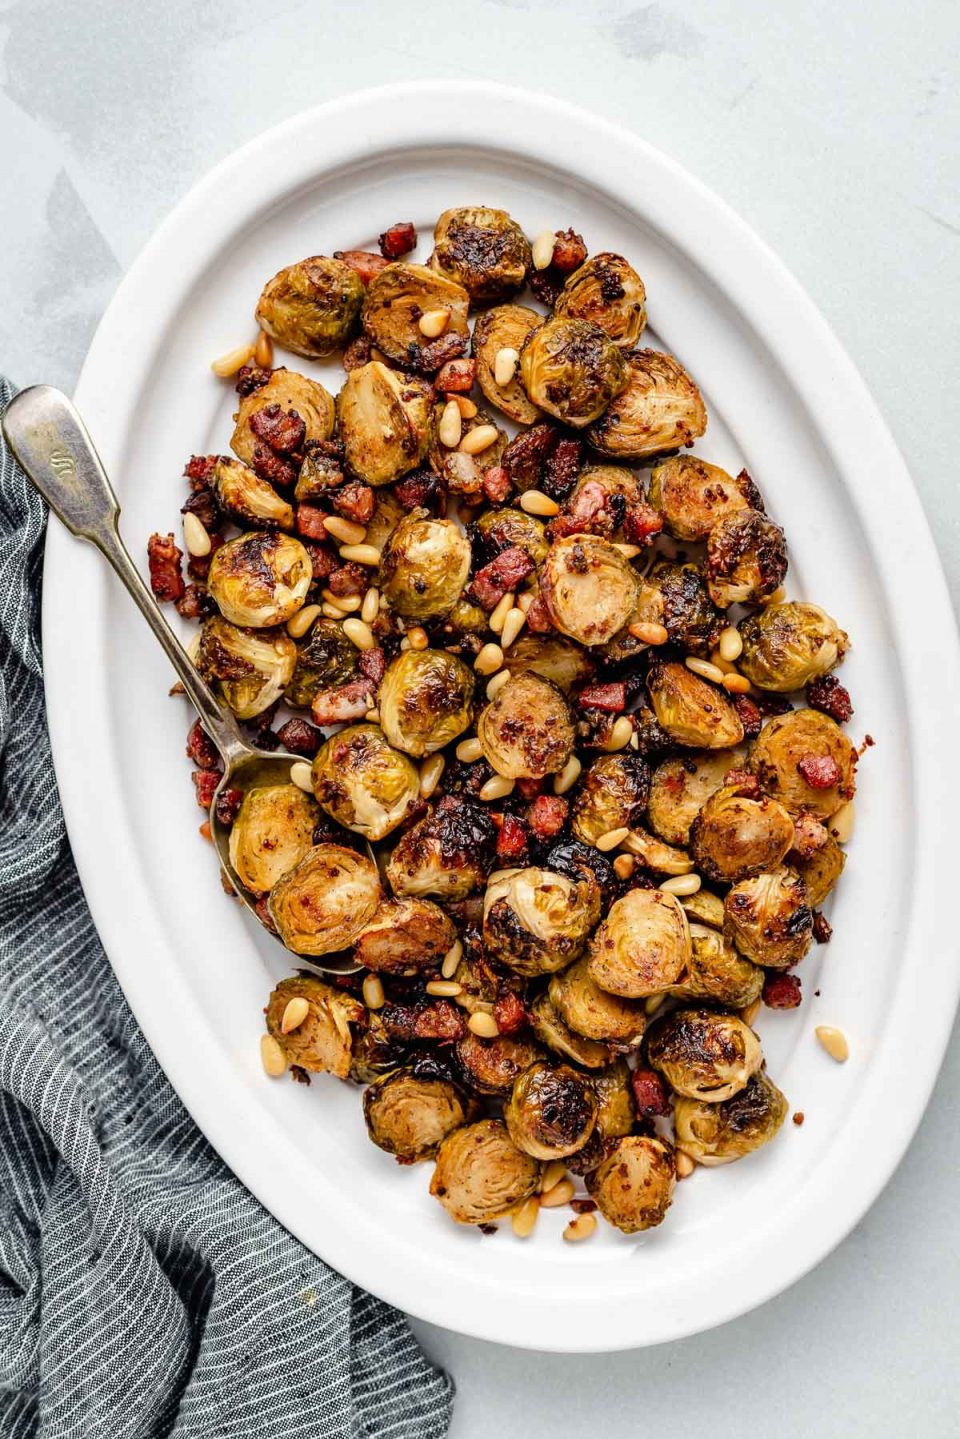 Maple roasted brussels sprouts on a large white serving dish, with pancetta & pine nuts. The white plate sits atop a light blue surface, next to a striped blue linen napkin.